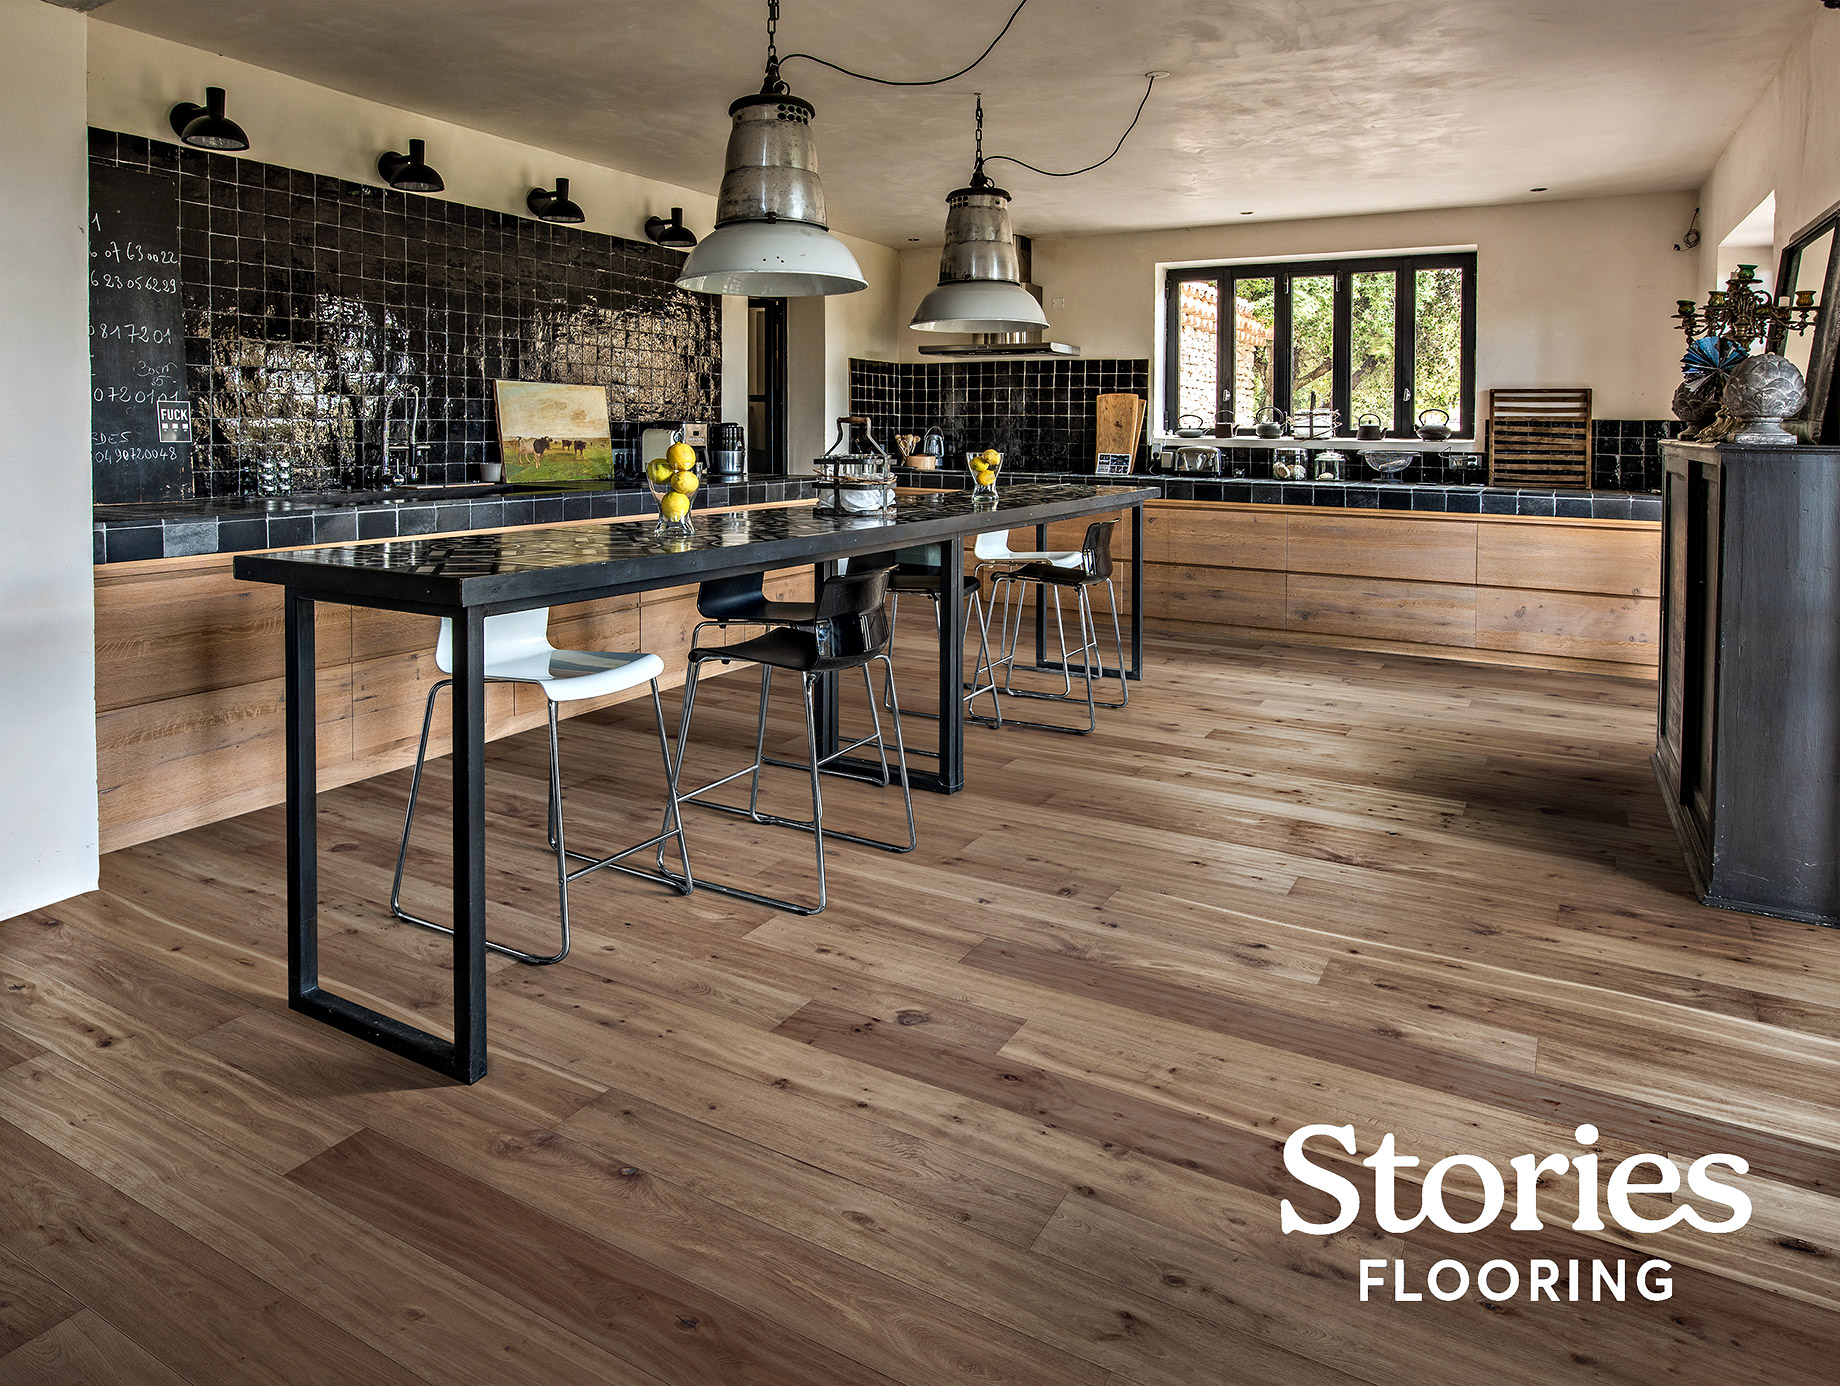 Stories Flooring – Kahrs Collection